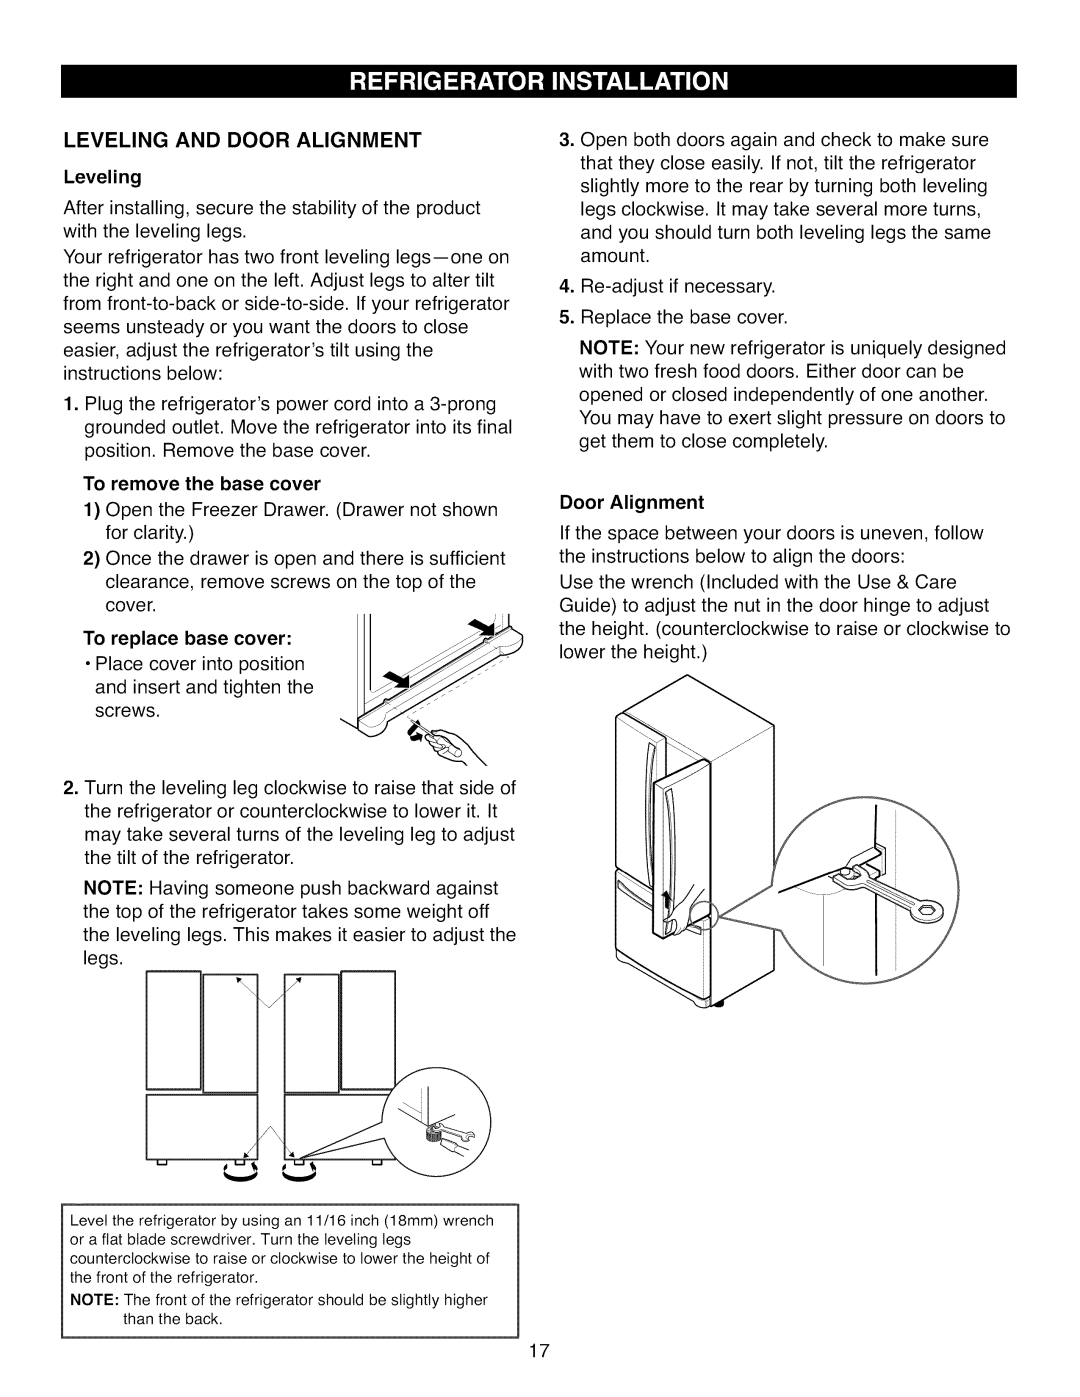 Kenmore 795.7104 manual iiII, Leveling And Door Alignment, To remove the base cover 